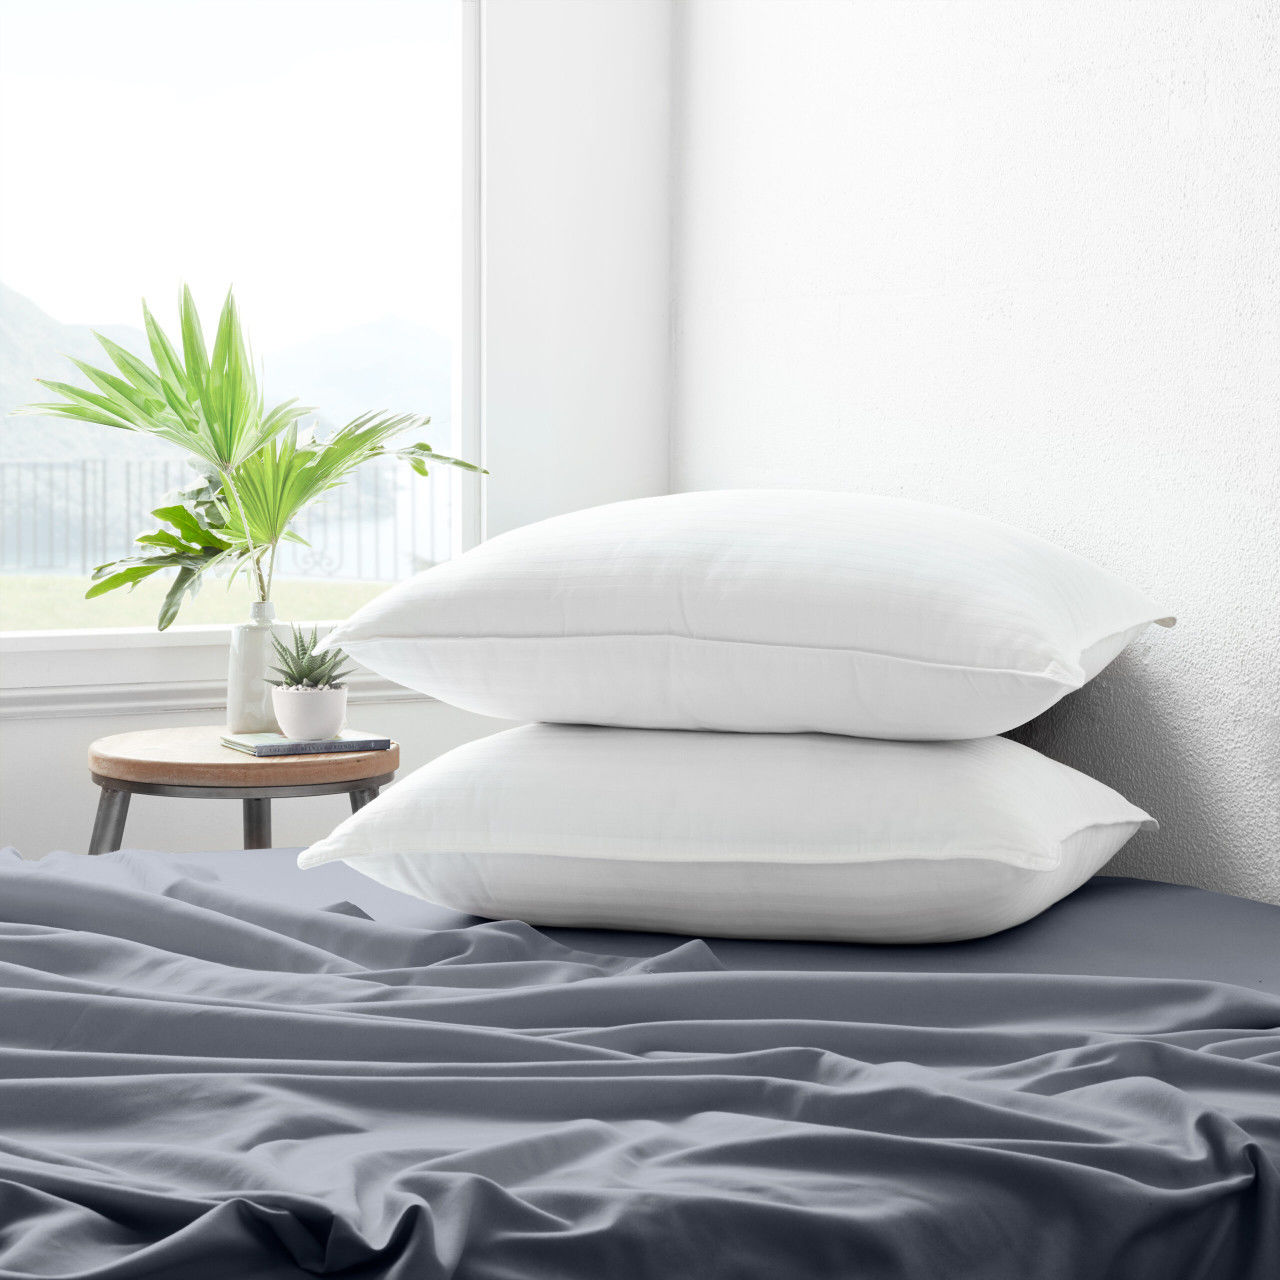 Are these fiber down blend pillows suitable for luxury hotel rooms?